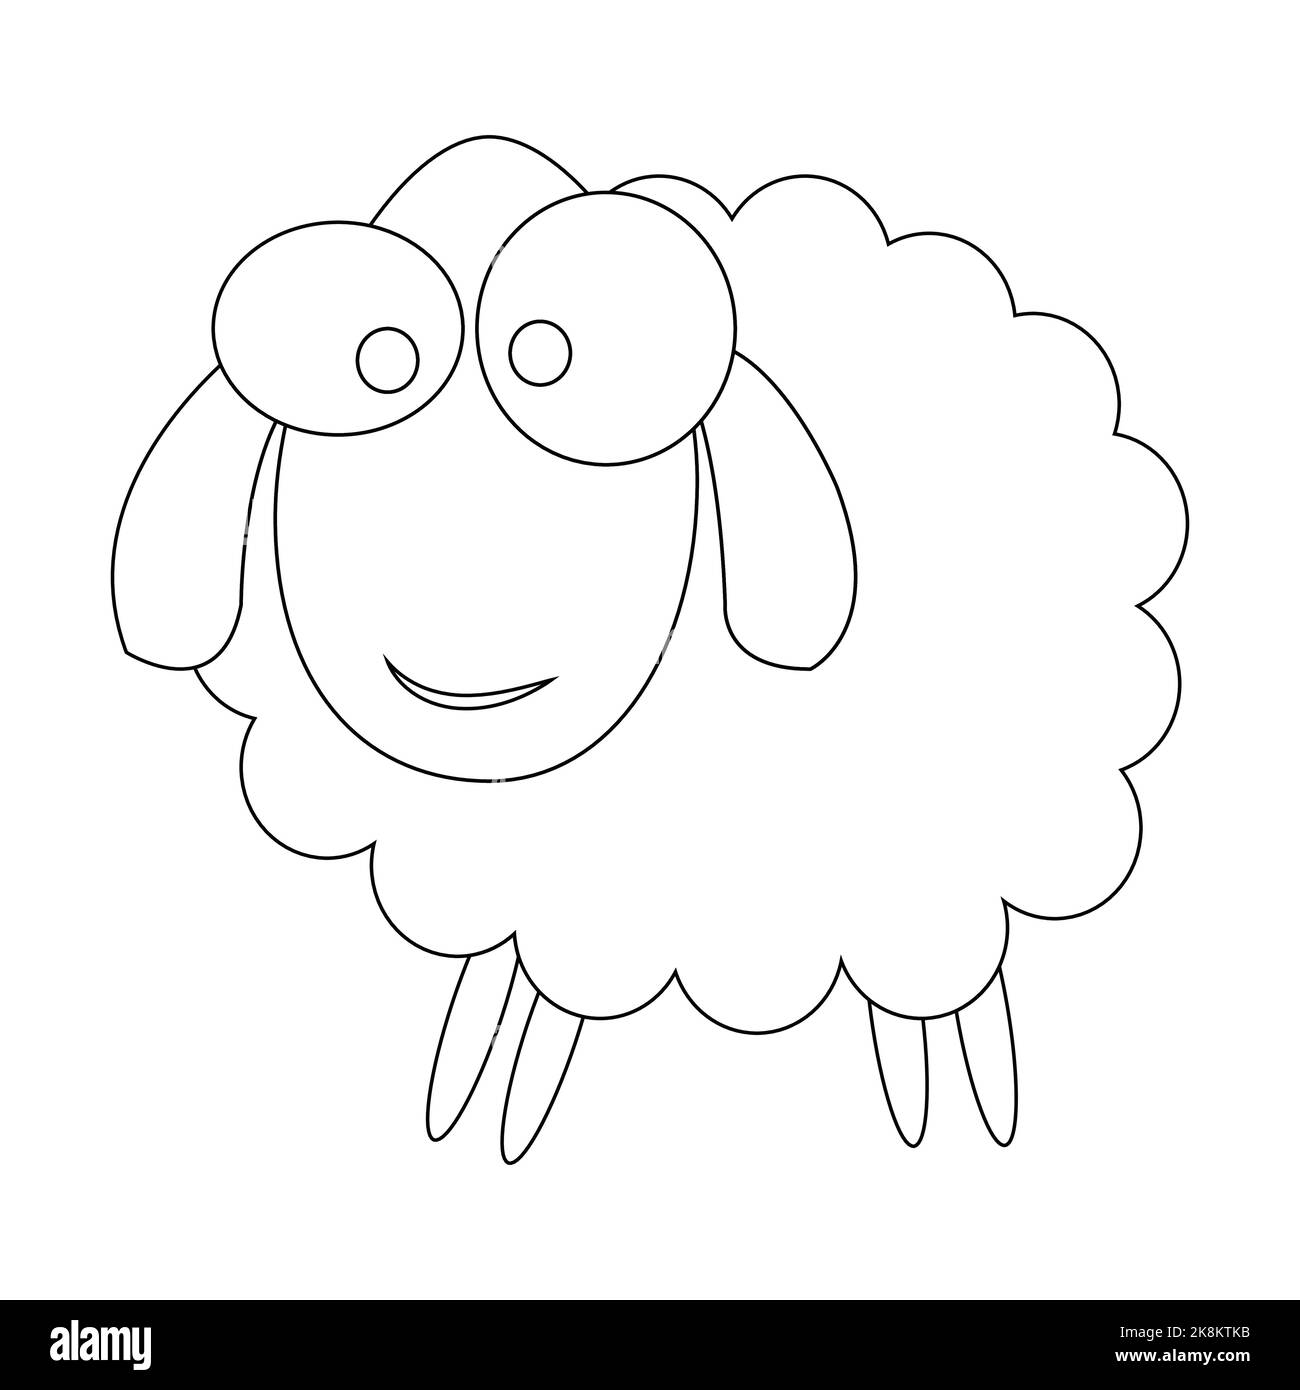 Happy sheep Black and White Stock Photos & Images - Alamy